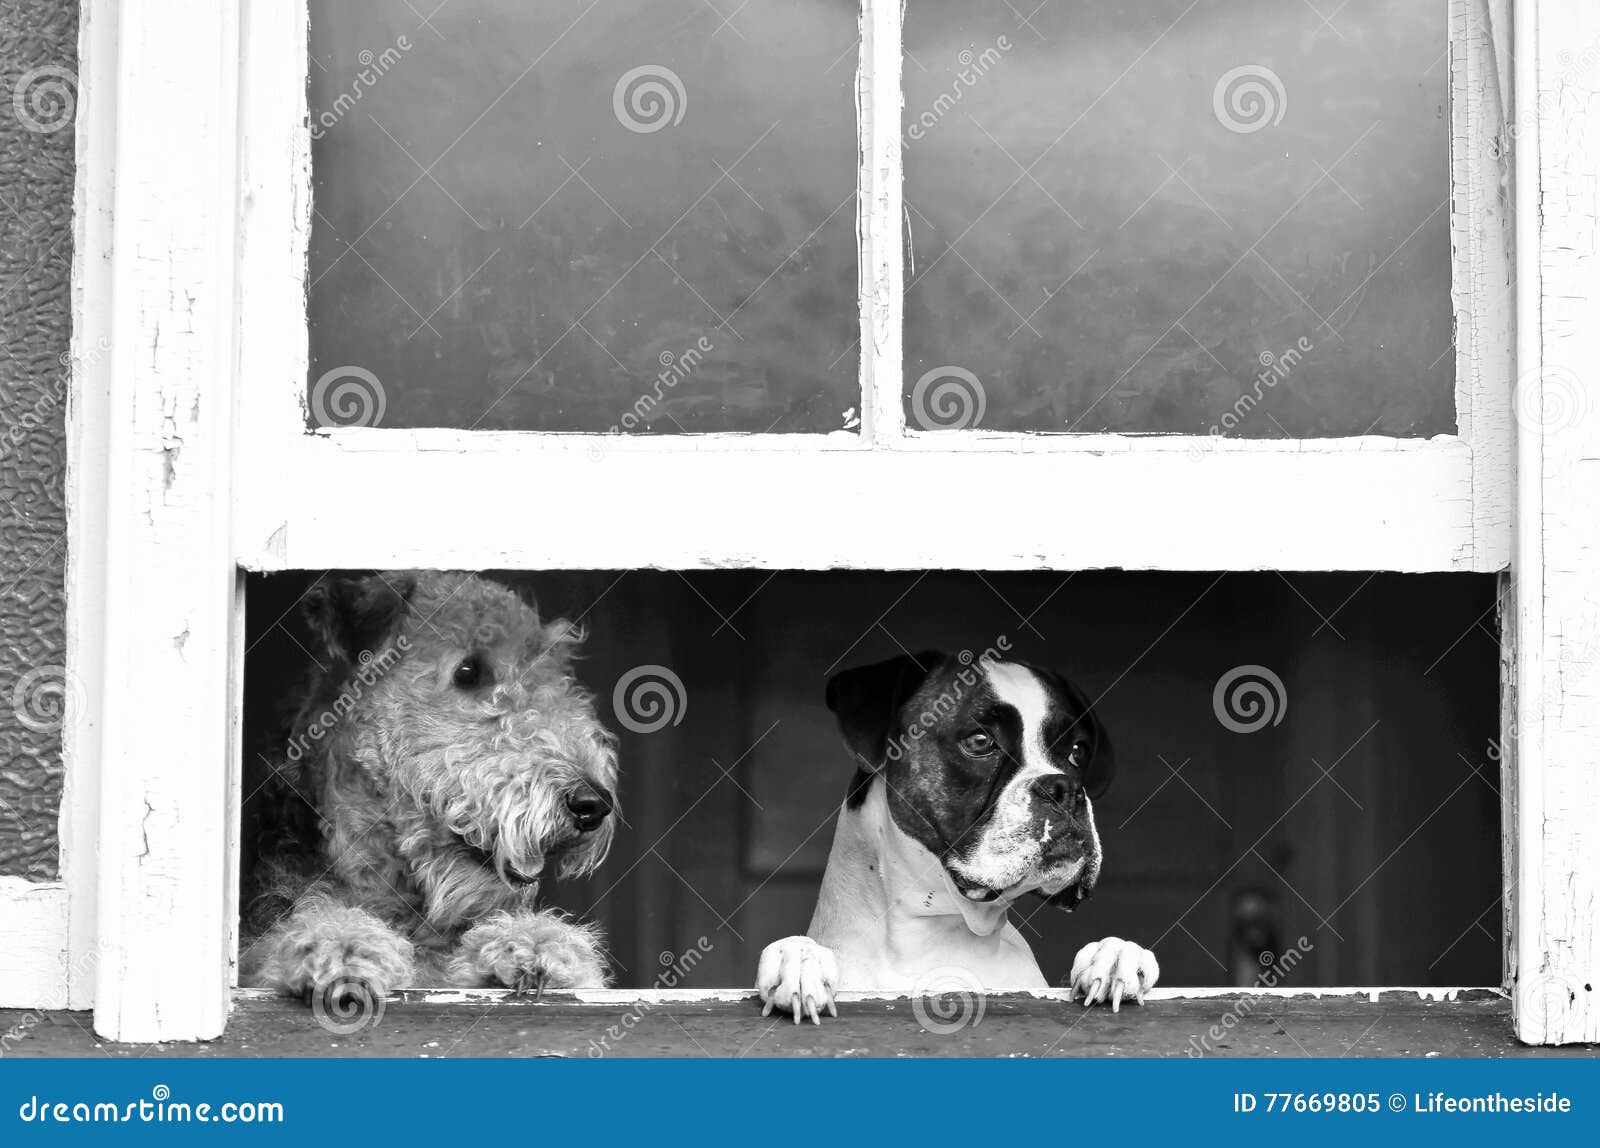 pet dogs waiting, watching with separation anxiety for return of owner